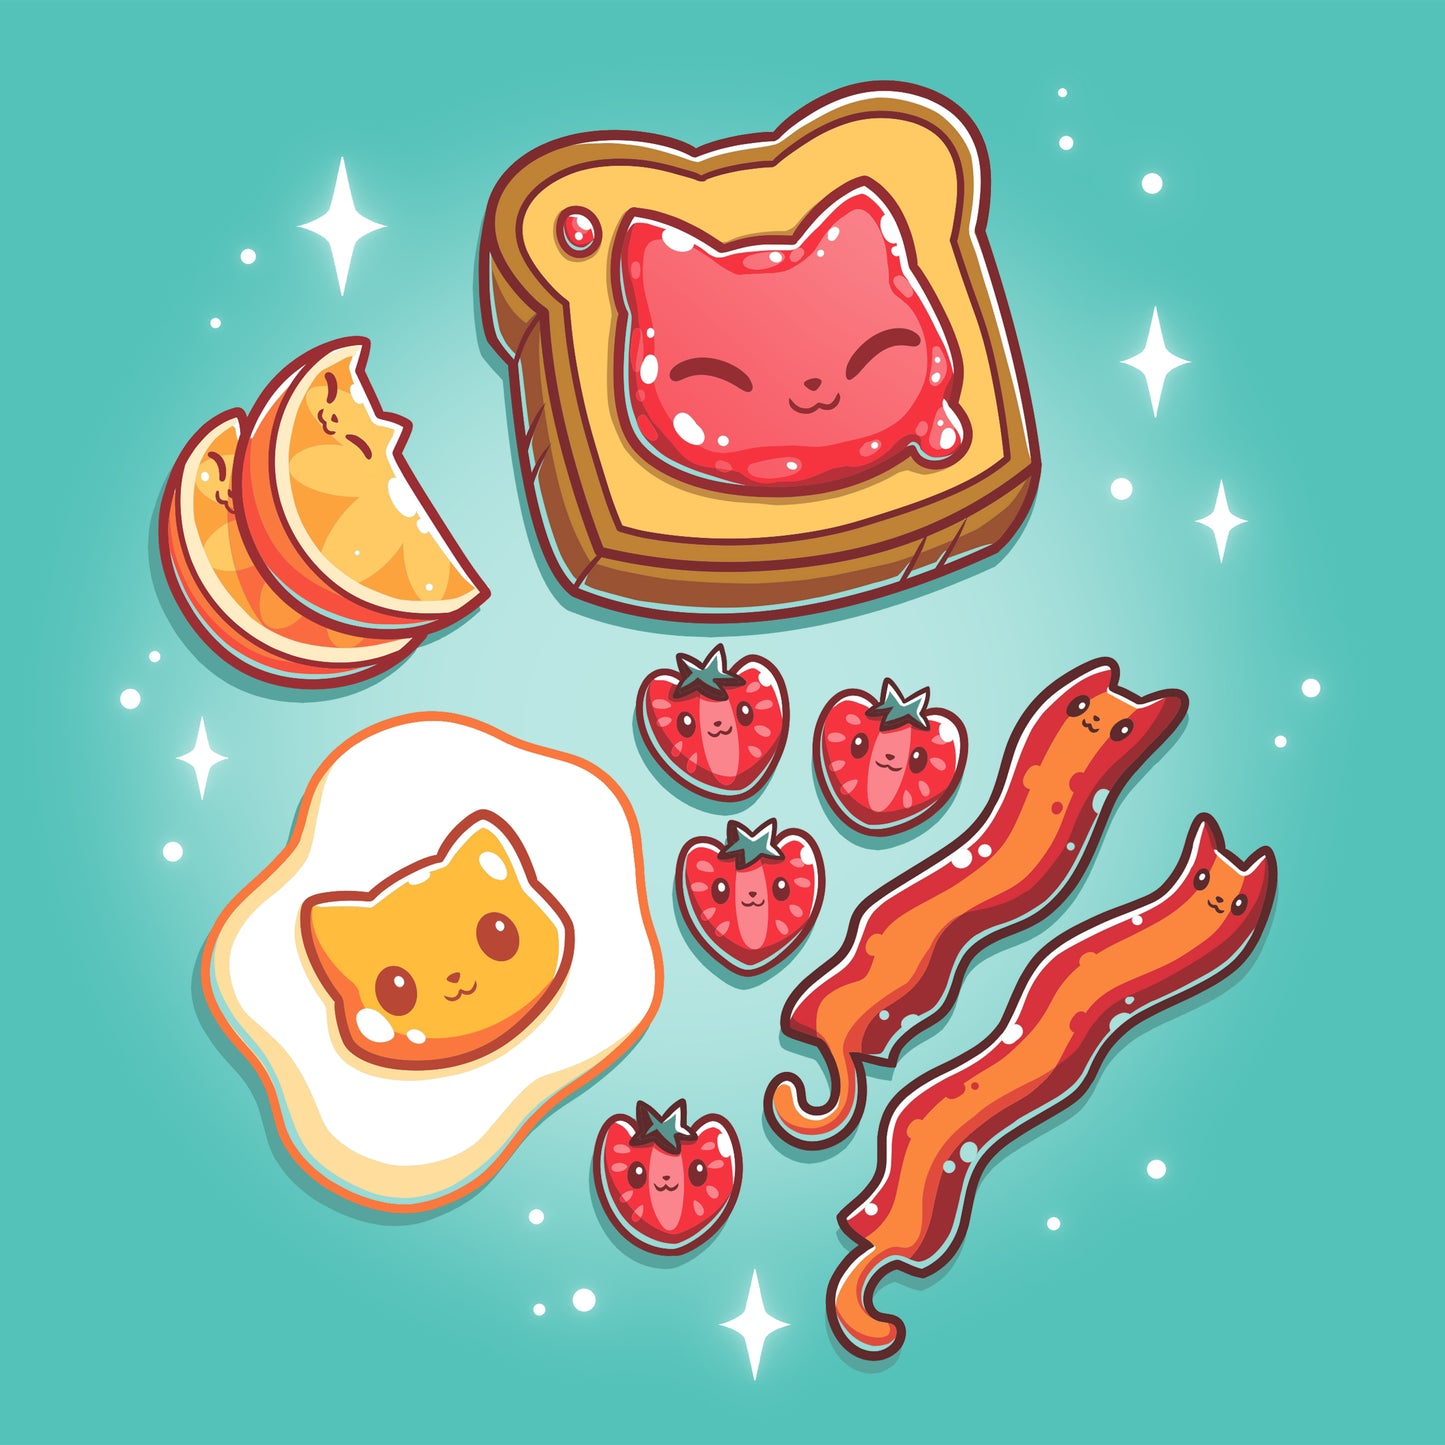 TeeTurtle's Caribbean Blue collection offers The Purrfect Breakfast with its kawaii designs.